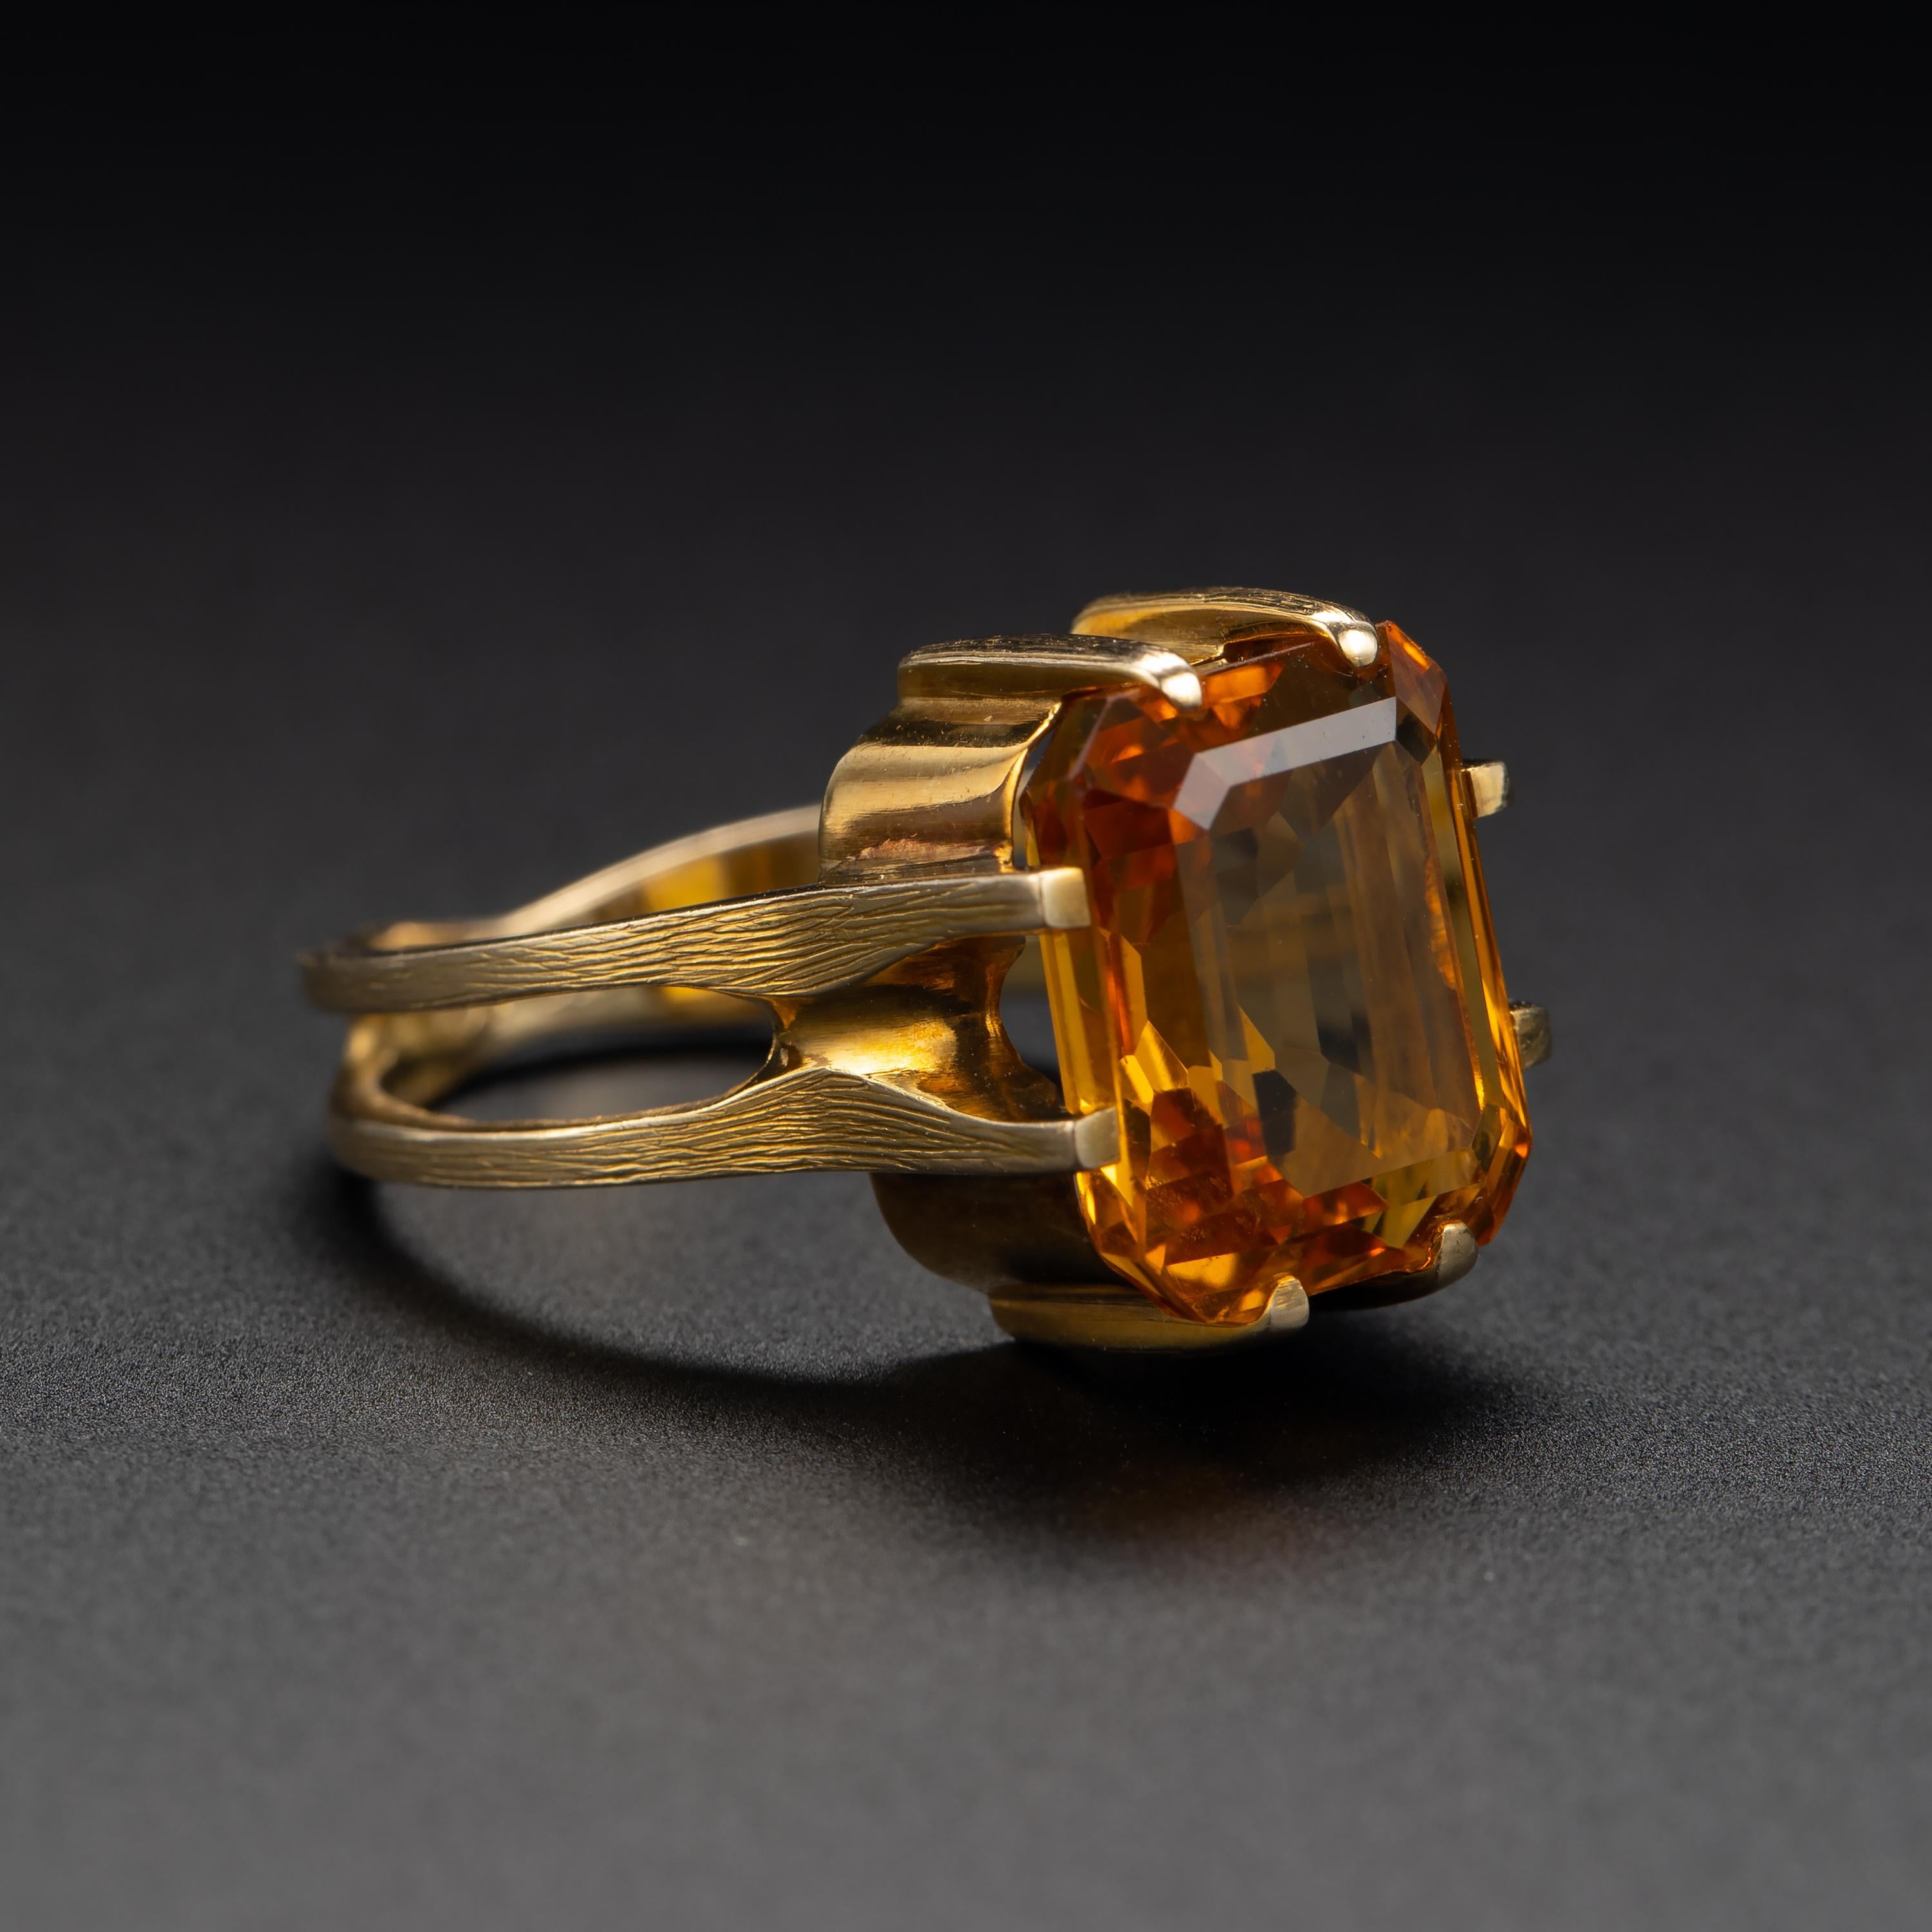 A rich, vividly-saturated natural citrine measuring approximately 12.27mm x 9.95 and weighing approximately 5 ¼ carats is the focal point of this truly unique, architectural ring from the Midcentury. While there is no maker's mark, the ring is